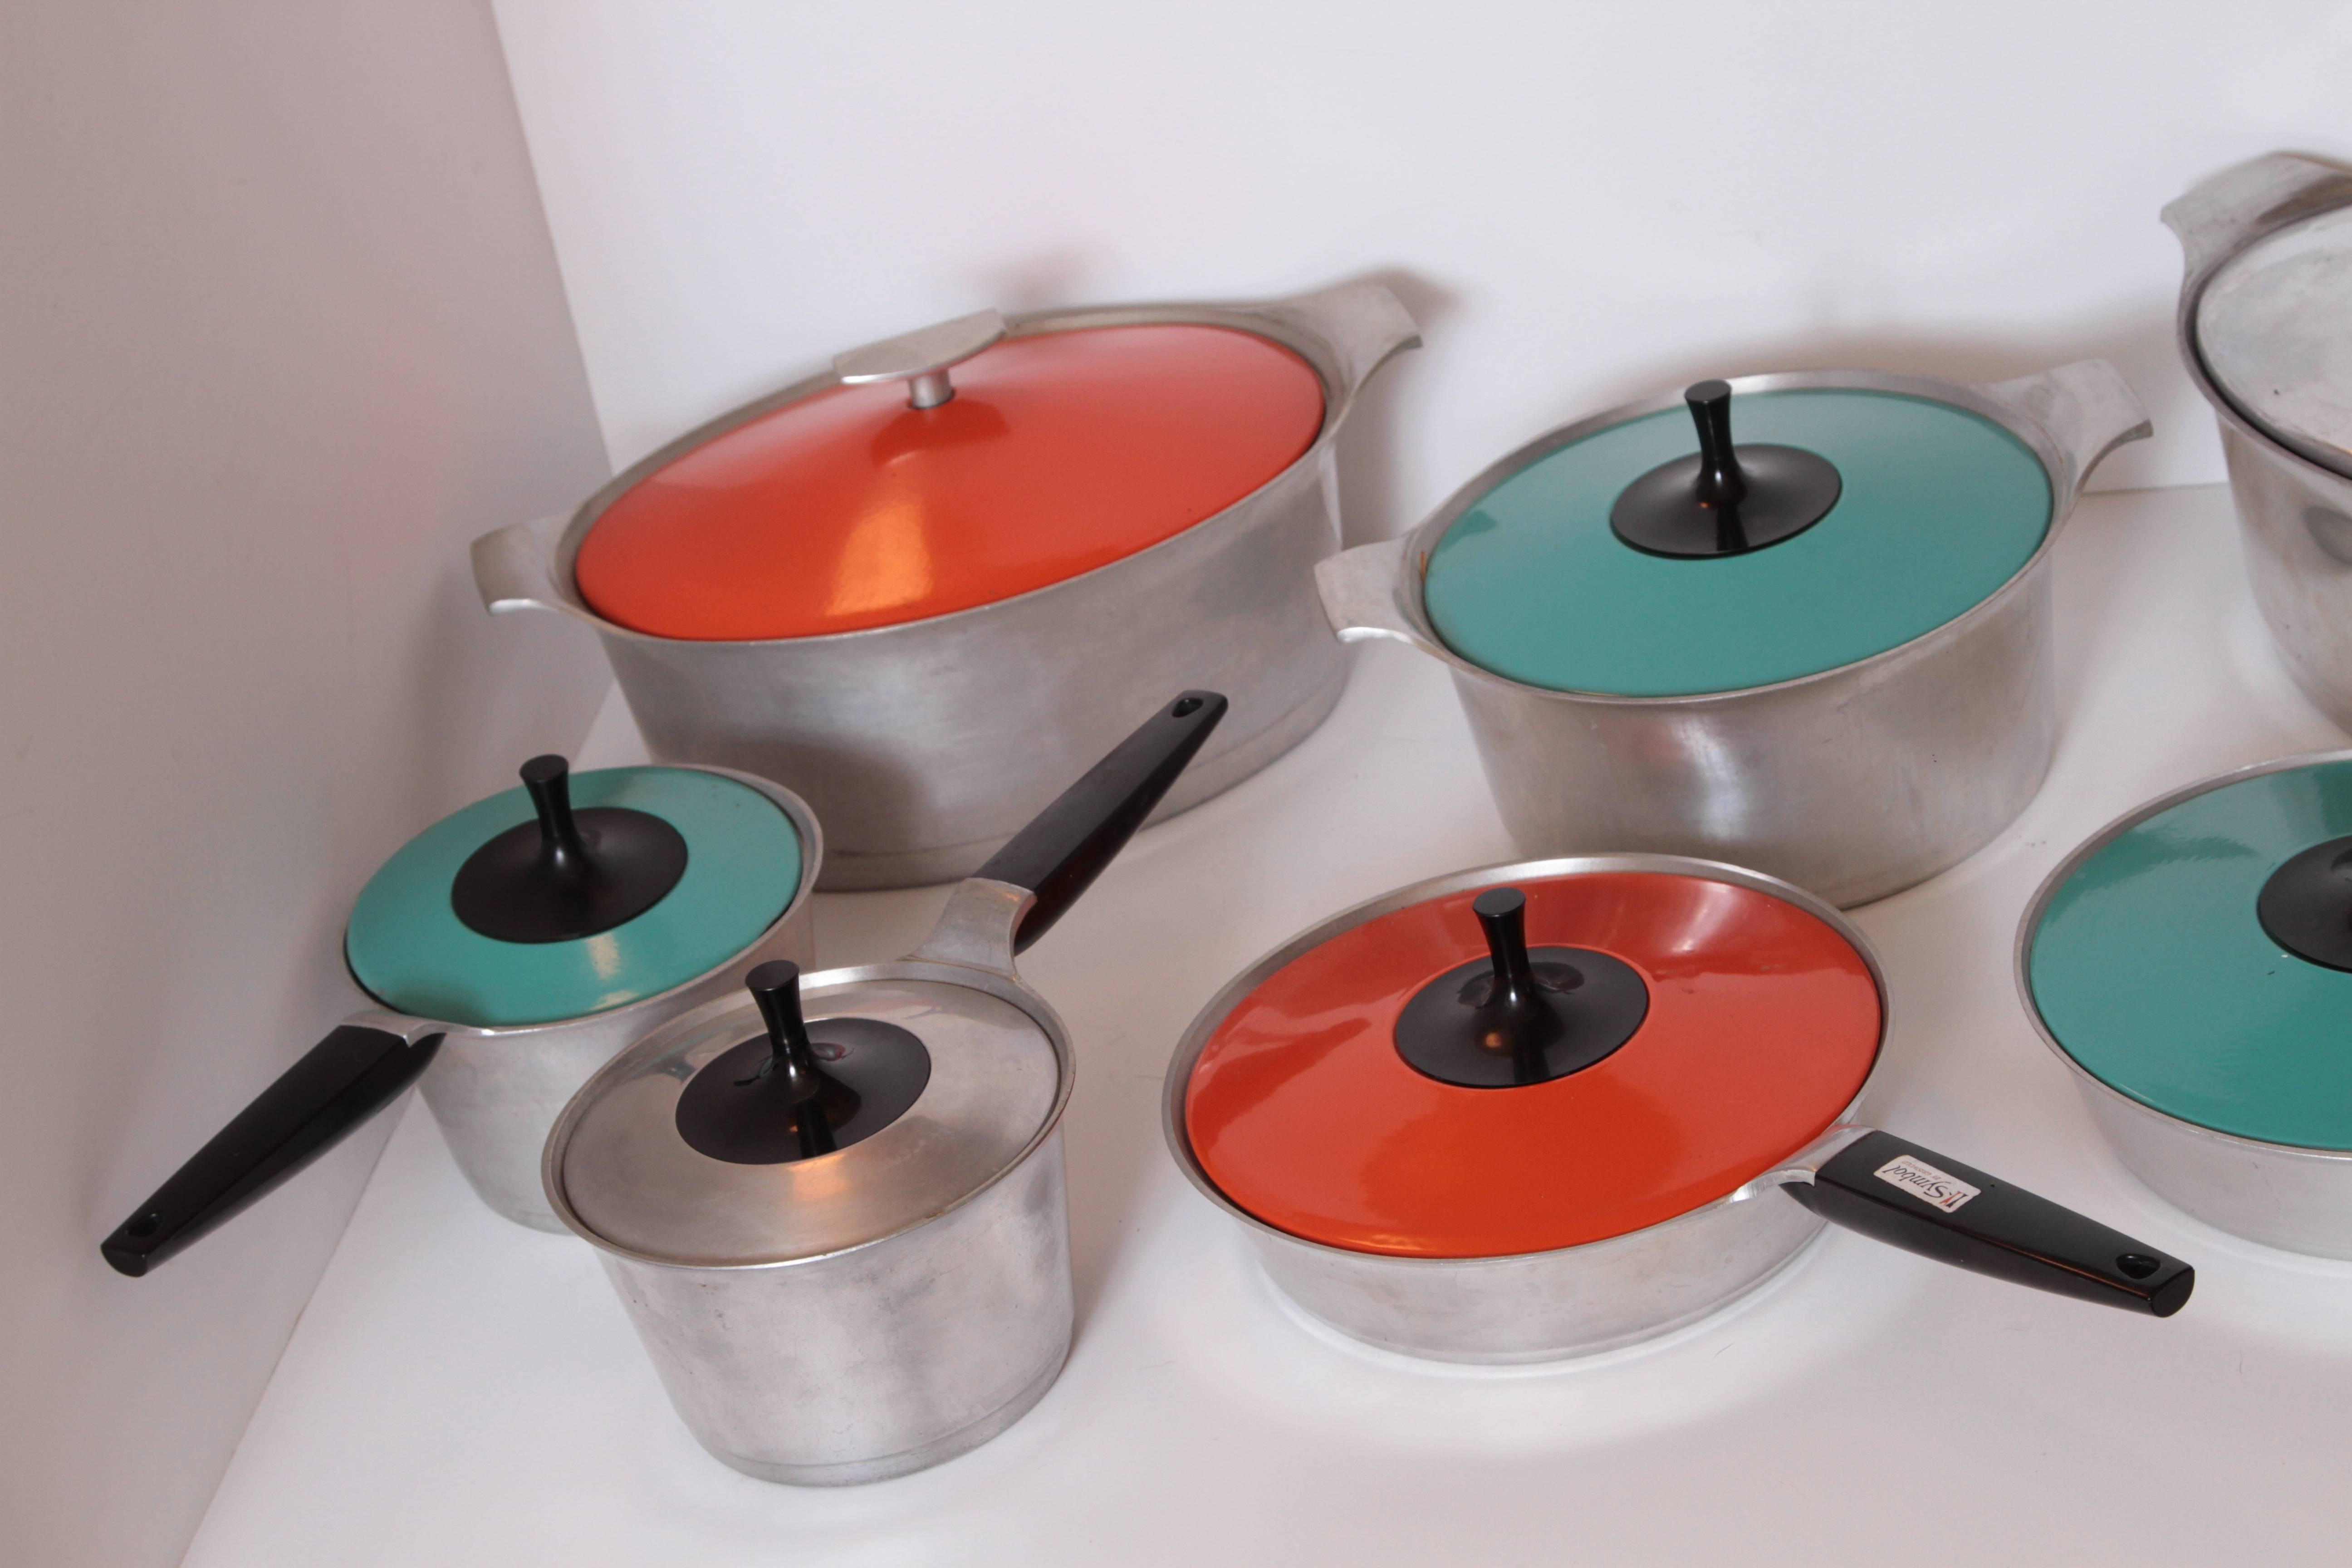 American Mid-Century Modernist Peter Muller-Munk, Collection Symbol Cook Ware, circa 1962 For Sale